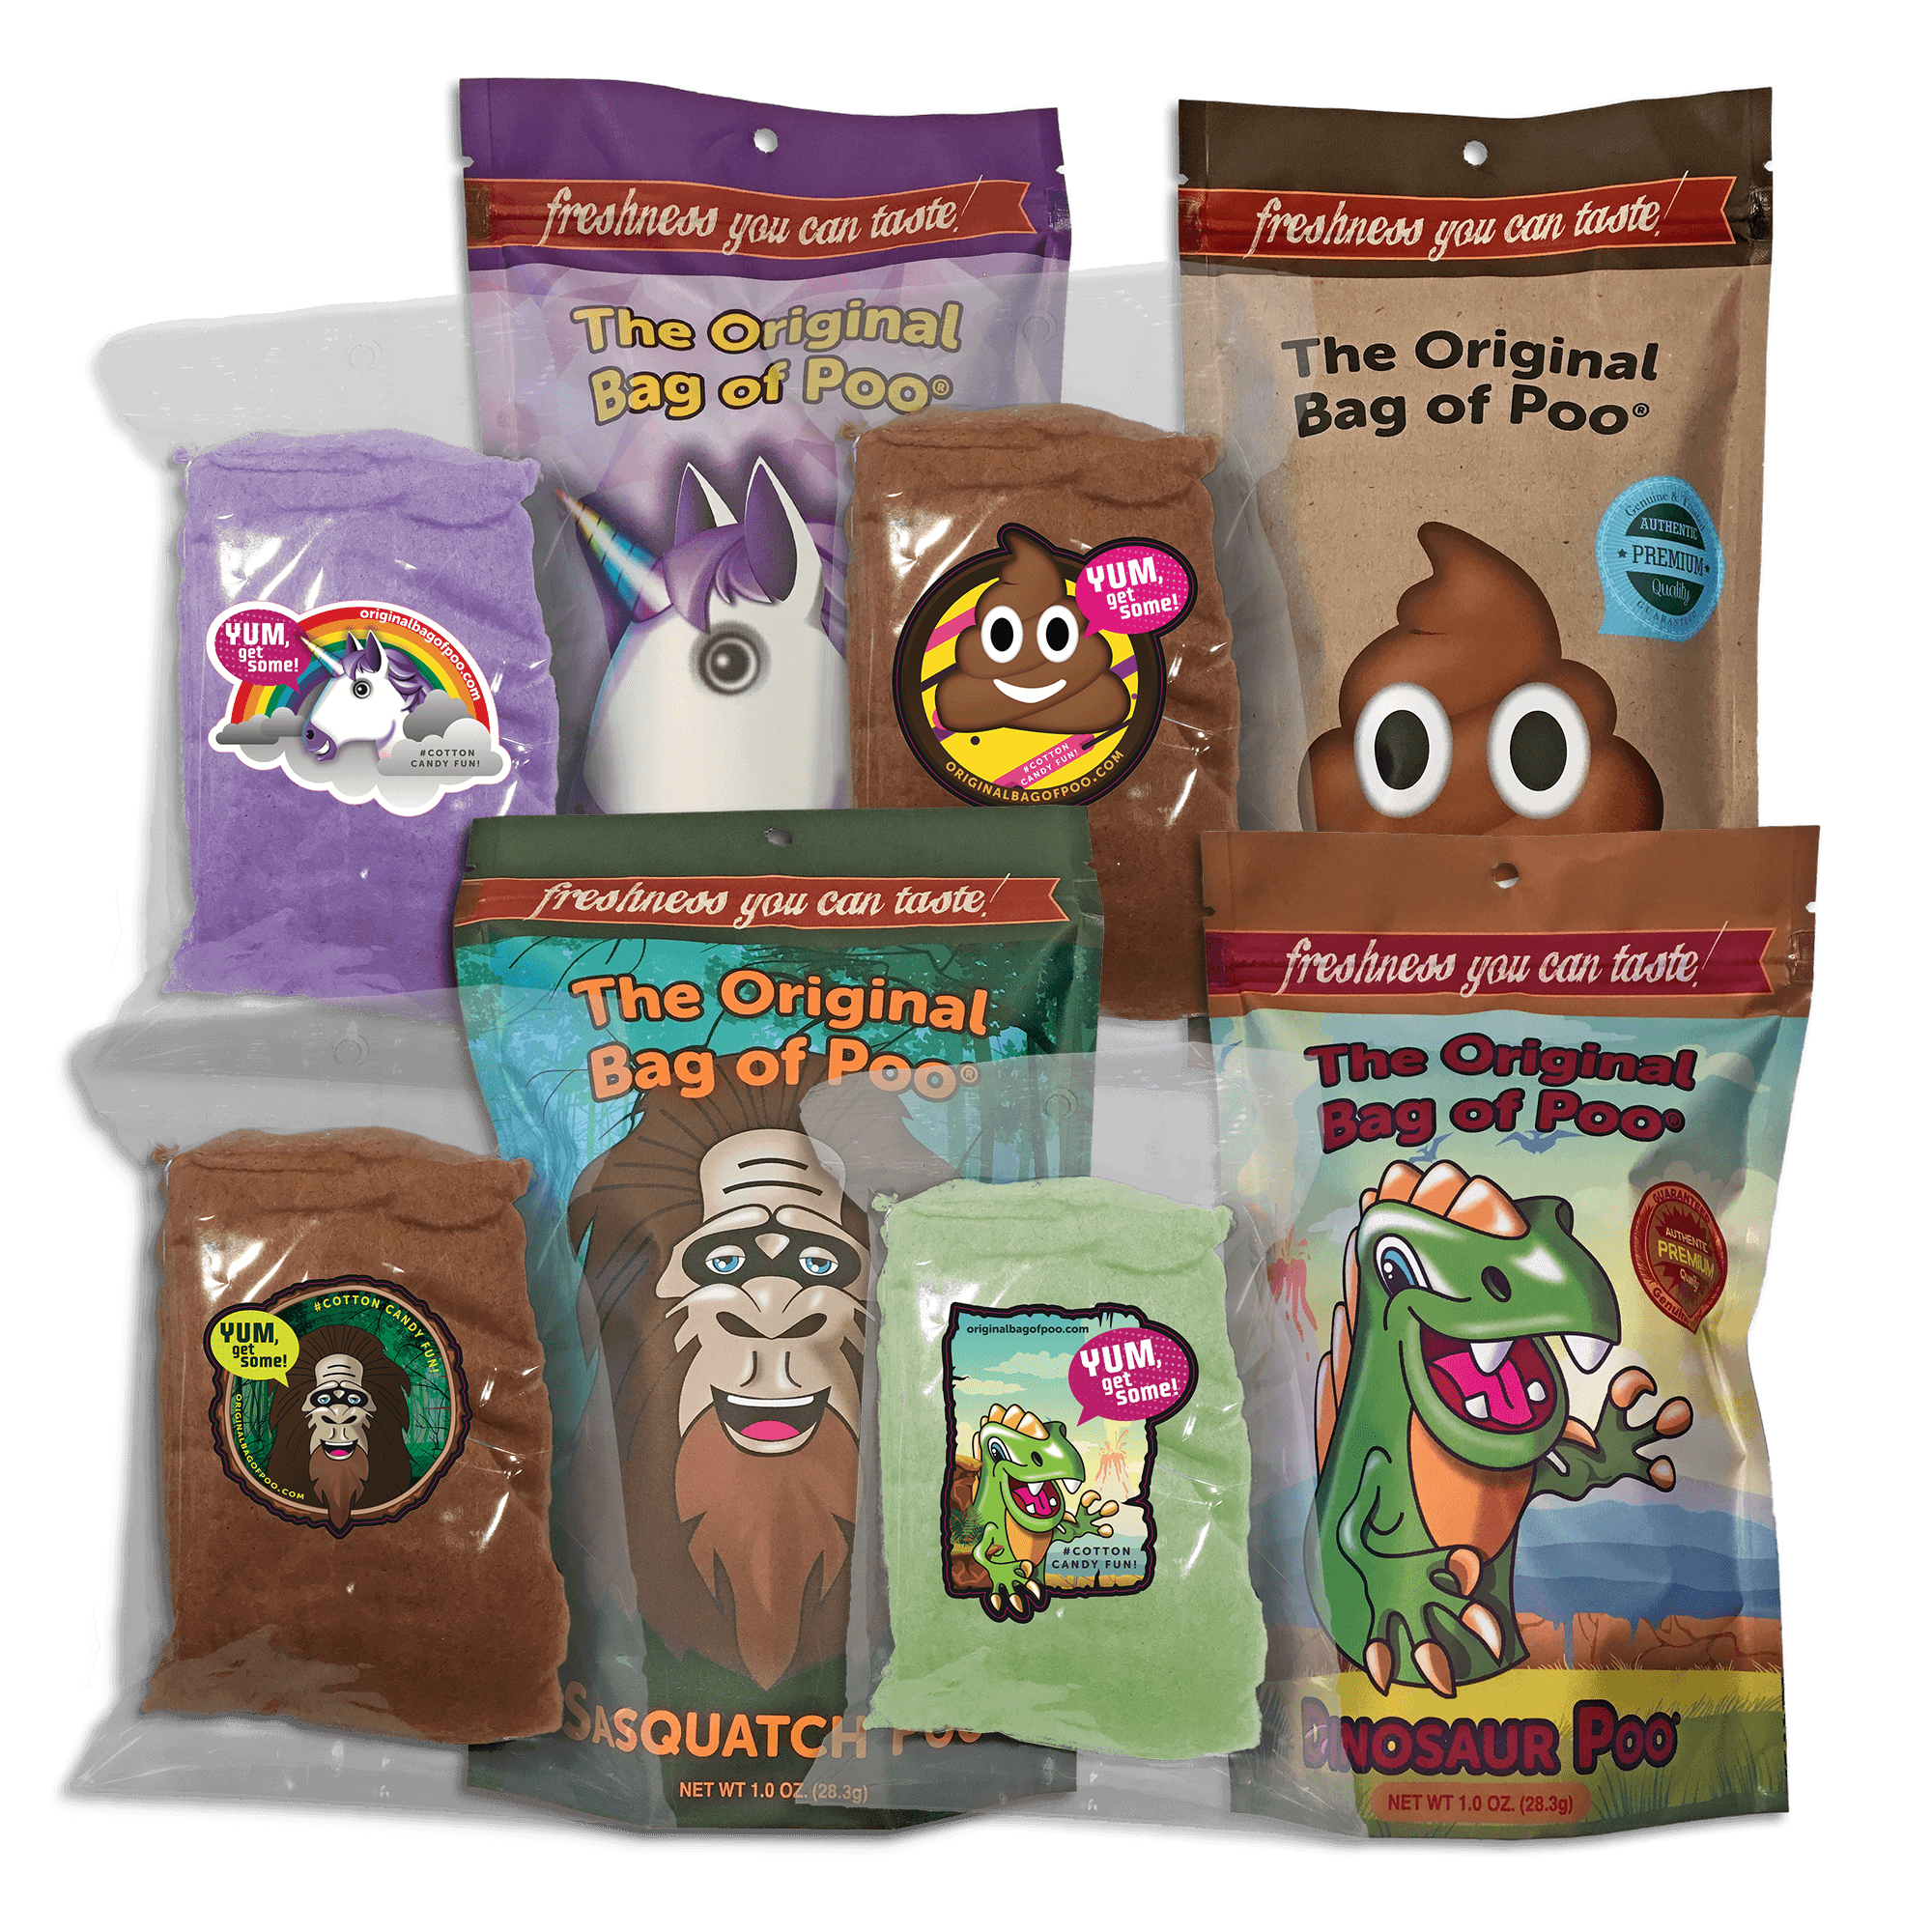 Build a bundle with The original bag of poo® The original bag of poo variety packs save 40% per bag when you buy 5 or more. So many great characters, colors and flavors.